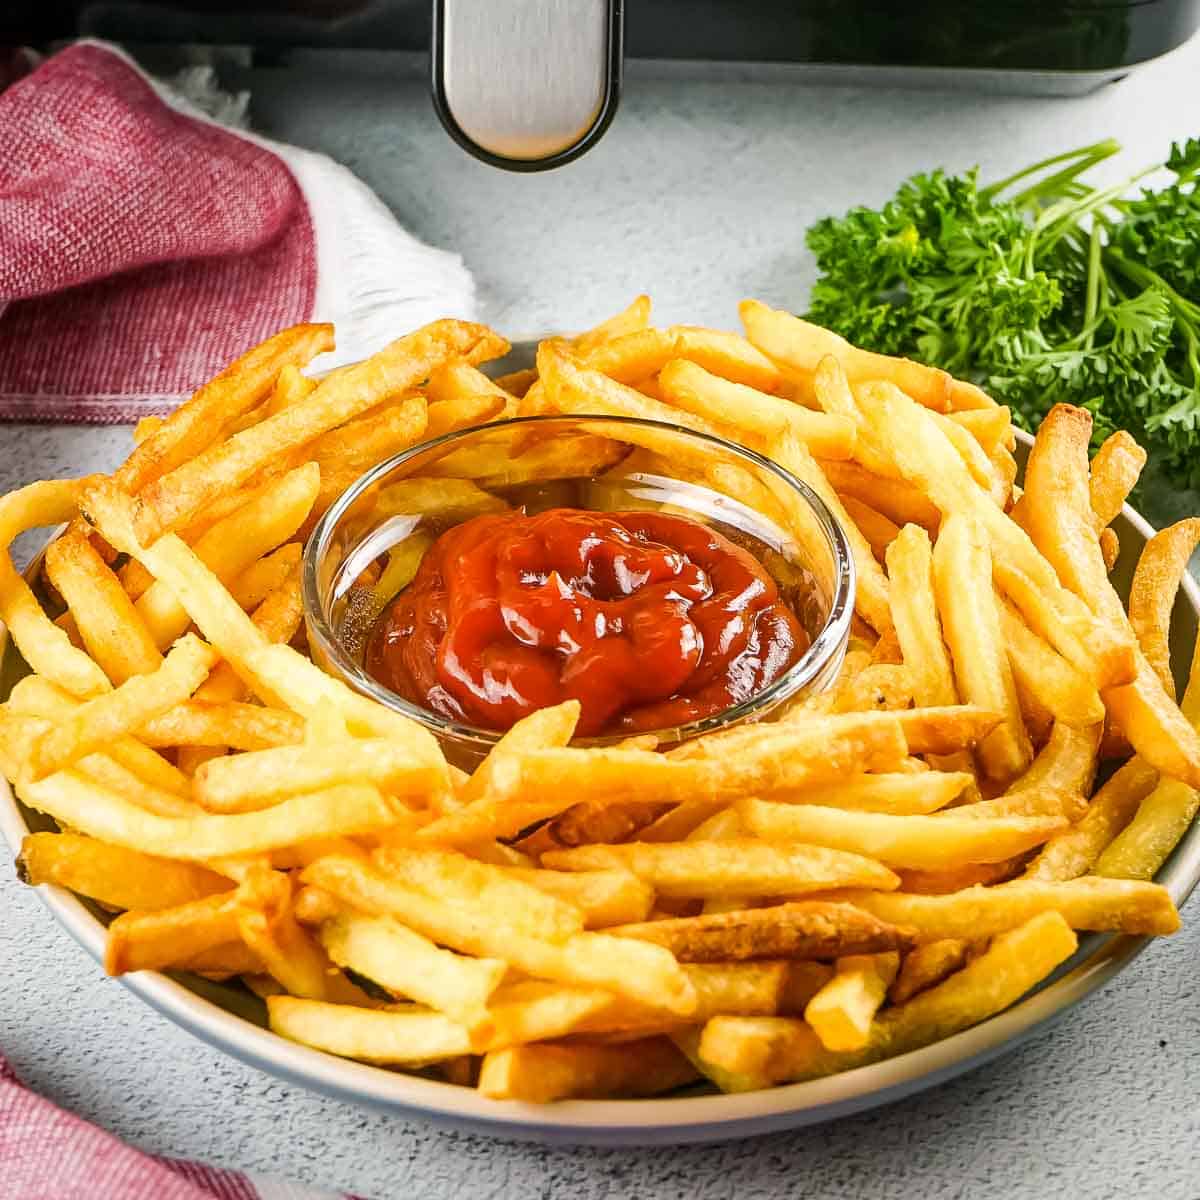 Side shot of golden French fries in a circle around a small clear bowl of ketchup with herbs and the air fryer in the background.